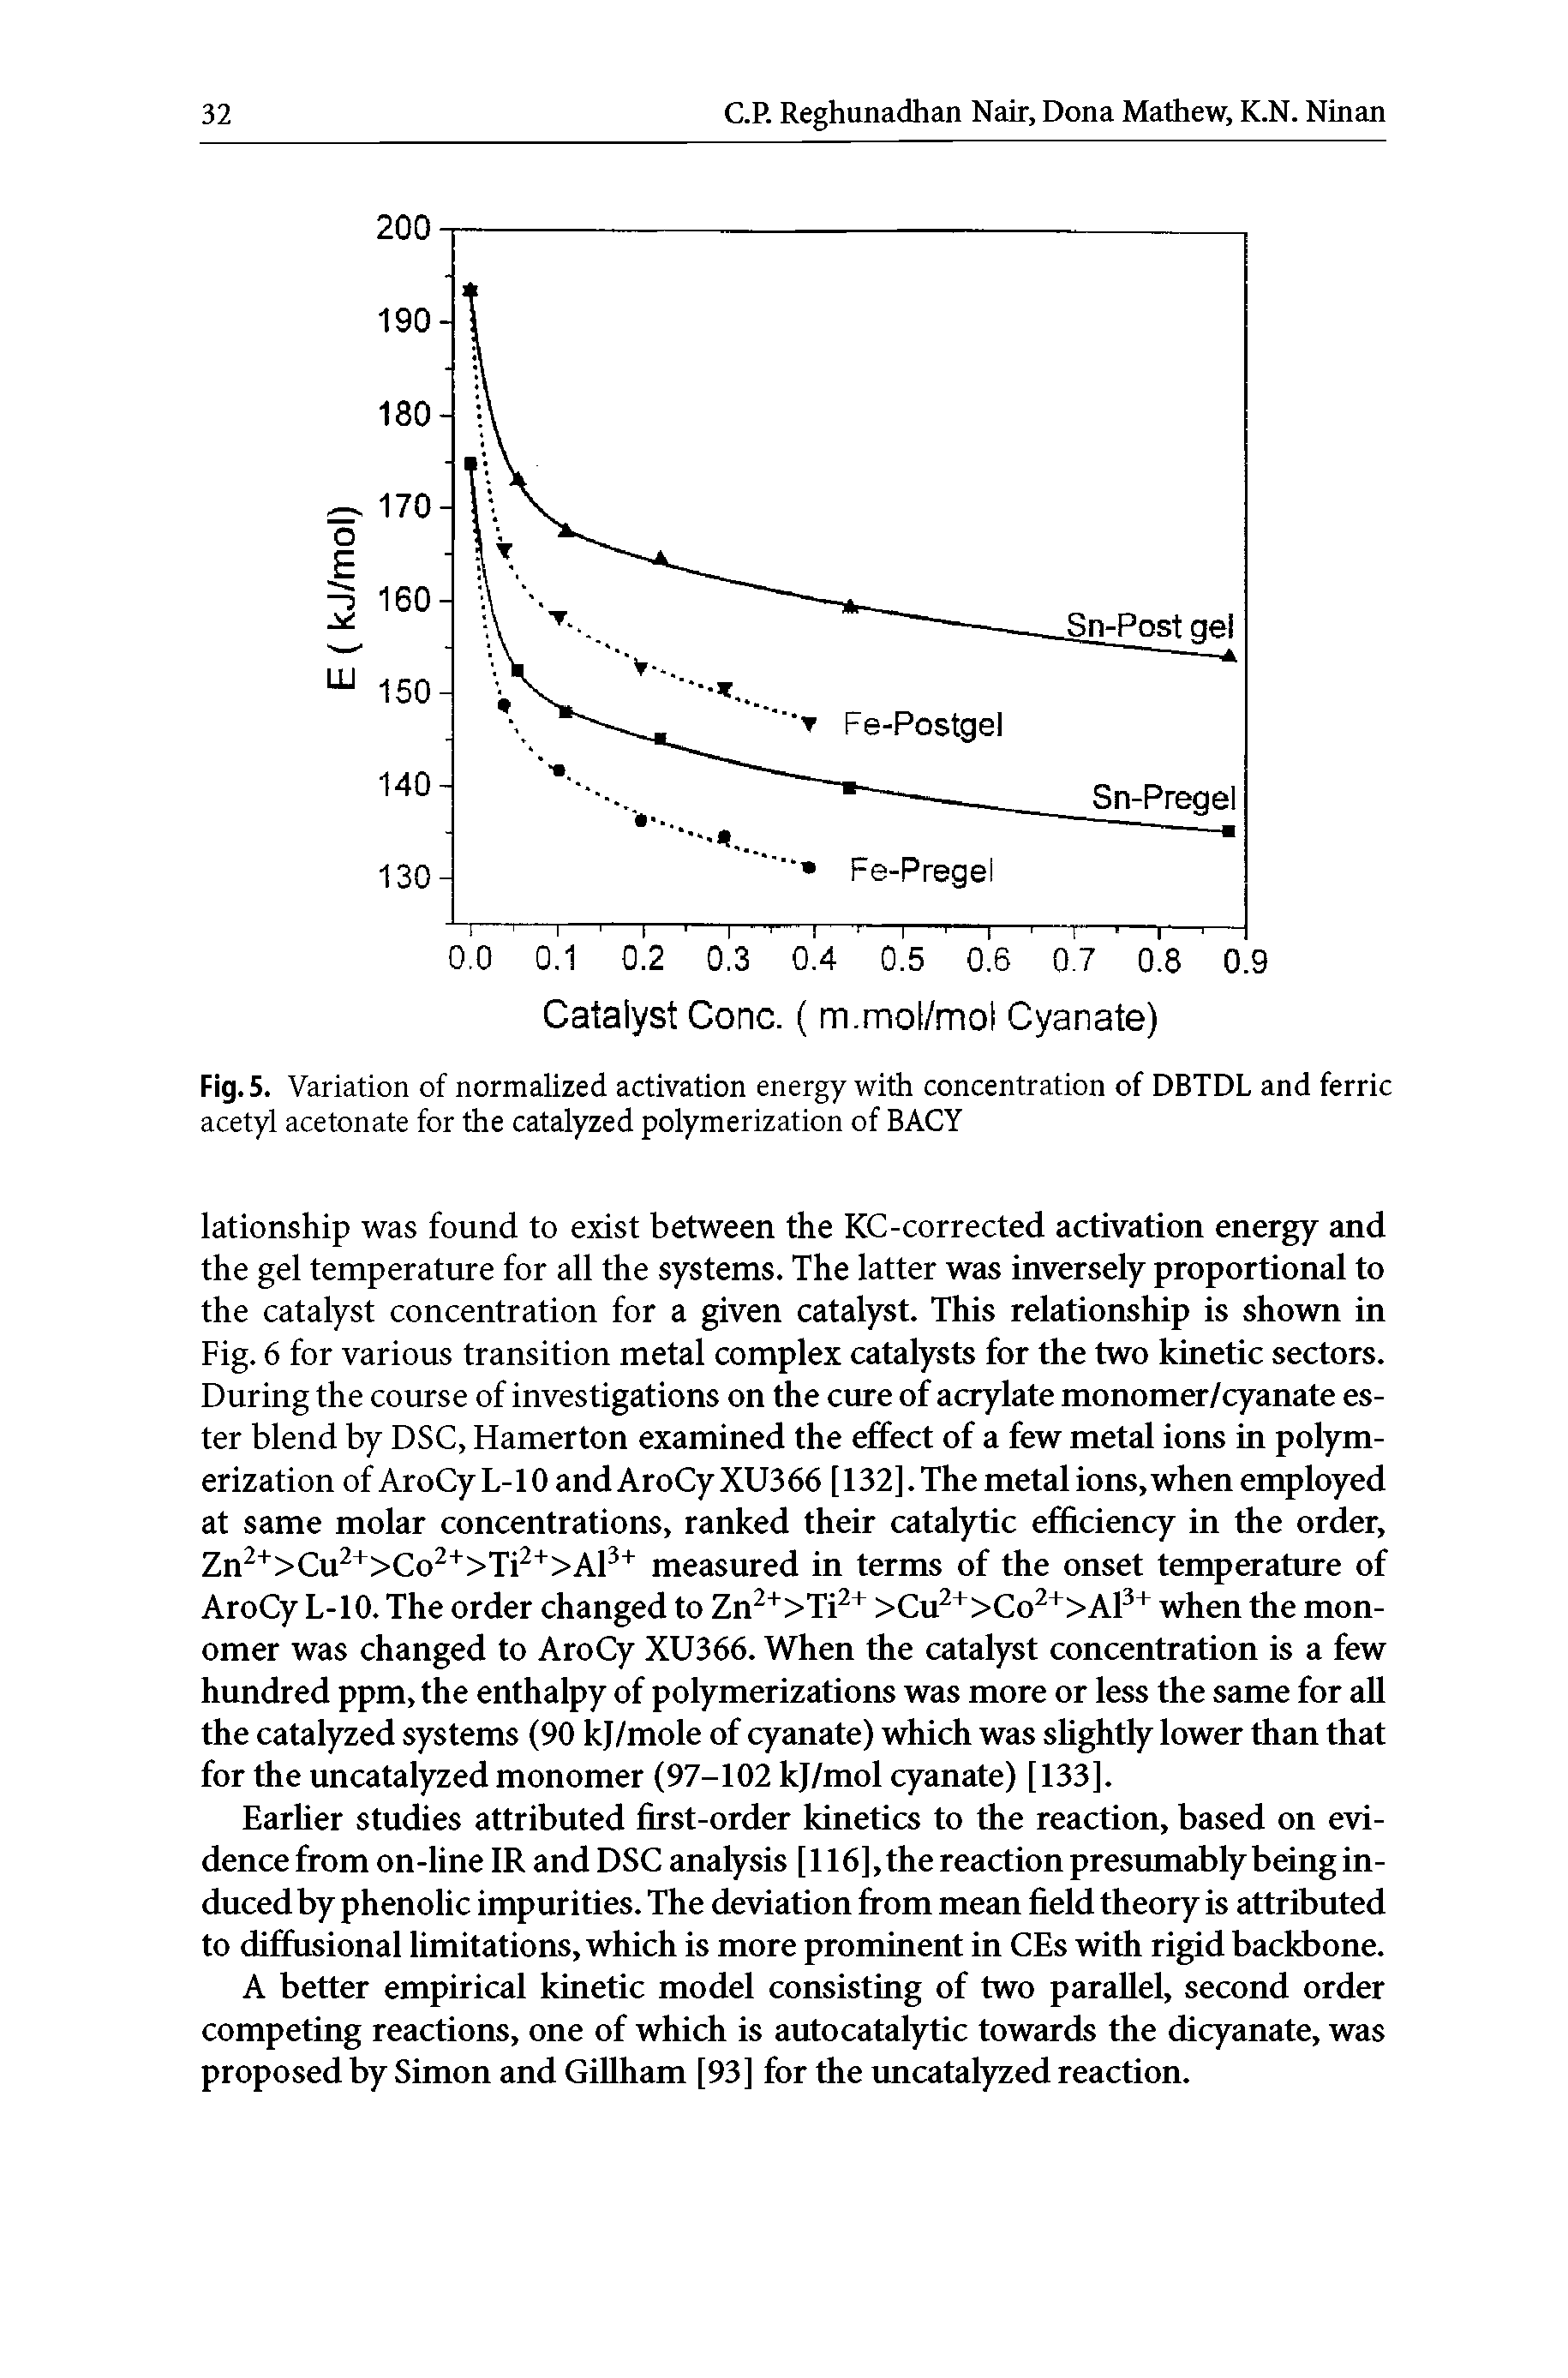 Fig. 5. Variation of normalized activation energy with concentration of DBTDL and ferric acetyl acetonate for the catalyzed polymerization of BACY...